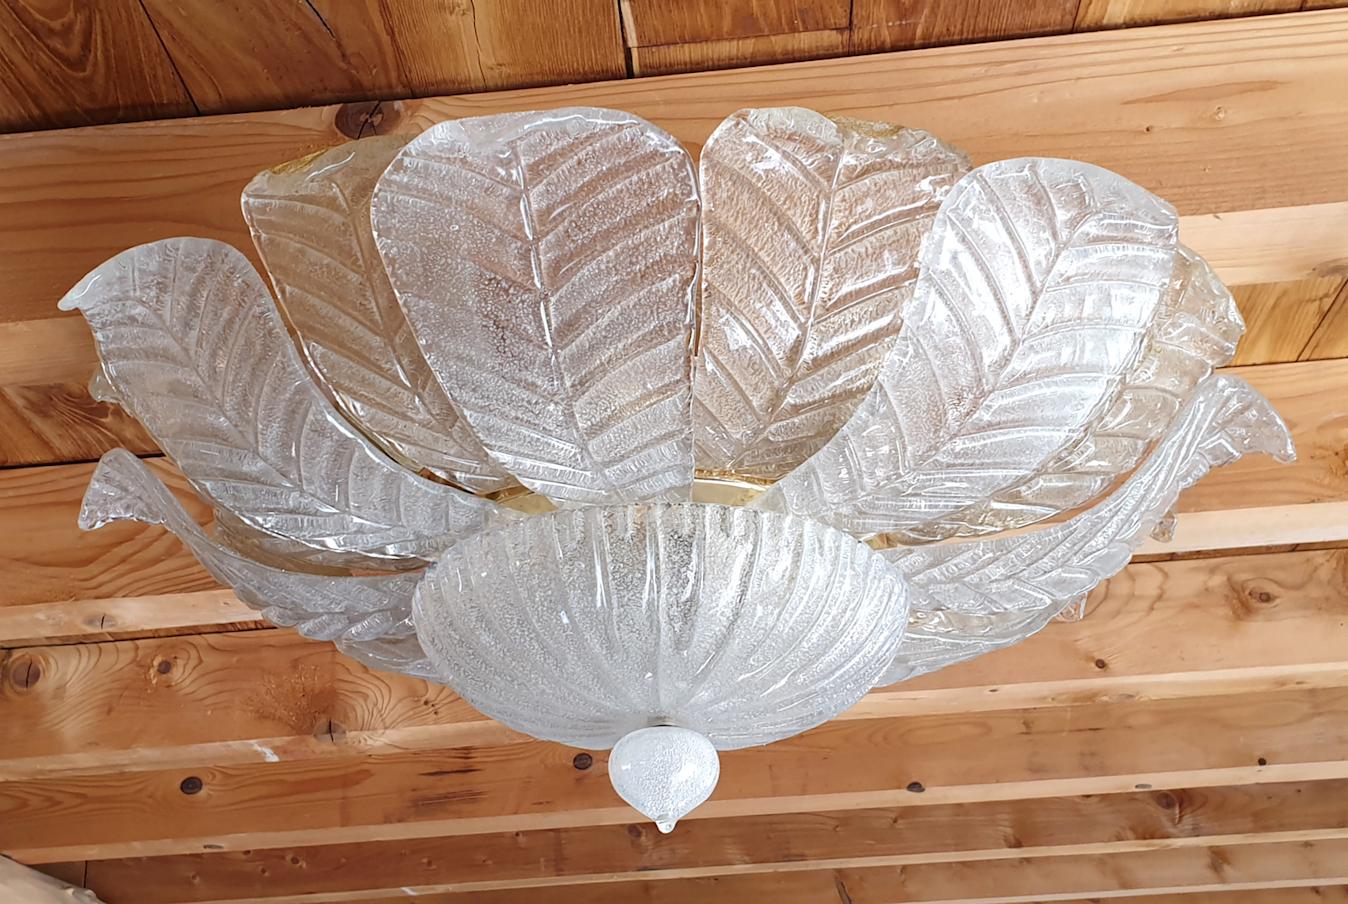 Mid-Century Modern translucent clear and gold Leaf Murano glass flushmount lights by Barovier e Toso, Italy, circa 1960s.
Brass mounts.
Two available. Sold and priced individually.
10 lights each, rewired for the US.
Very good condition.